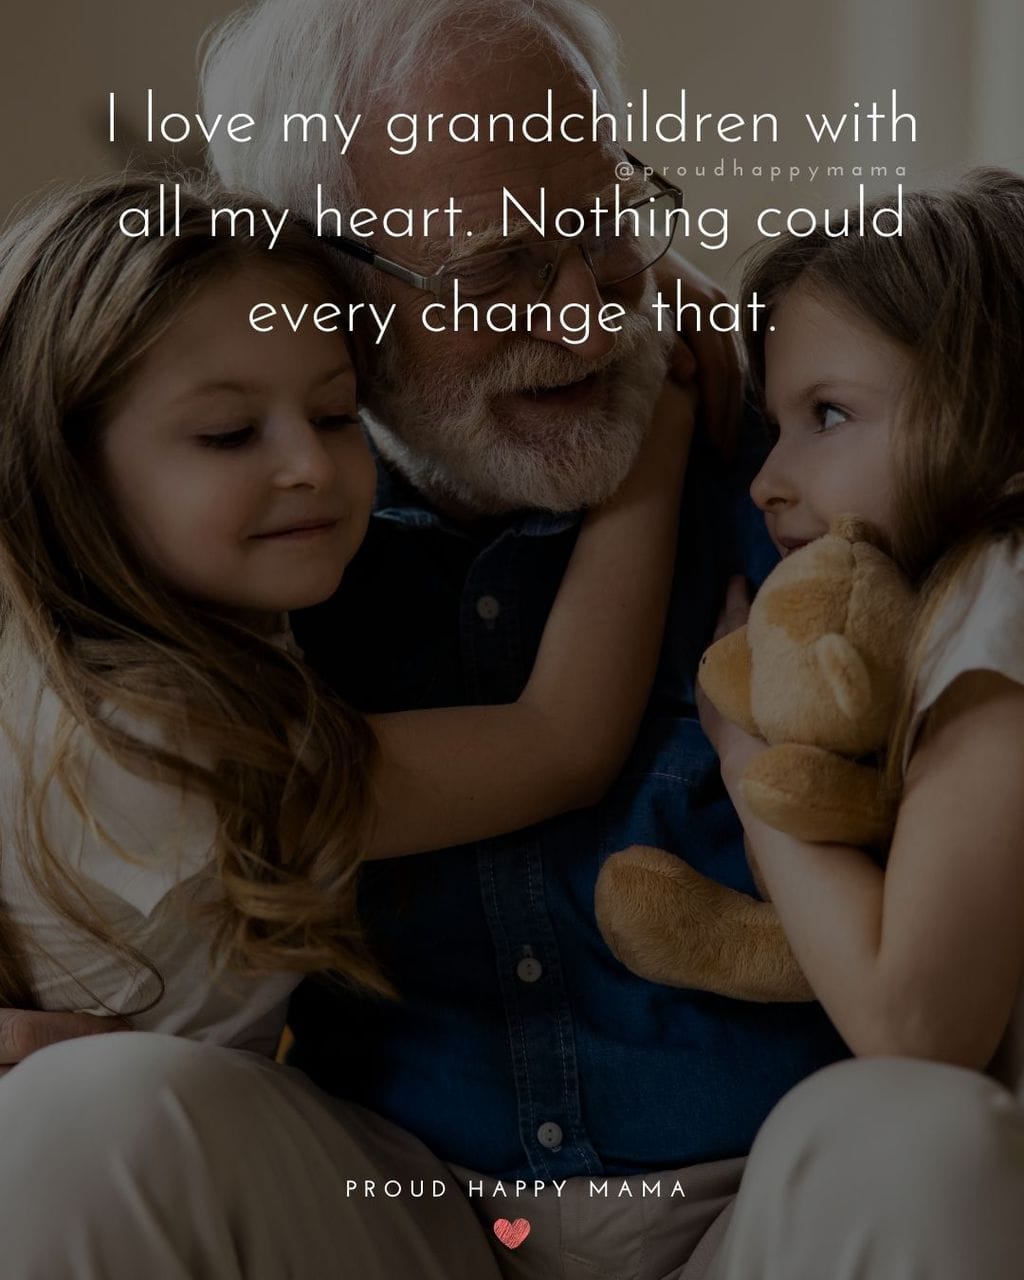 Quotes for Grandchildren - I love my grandchildren with all my heart. Nothing could every change that.